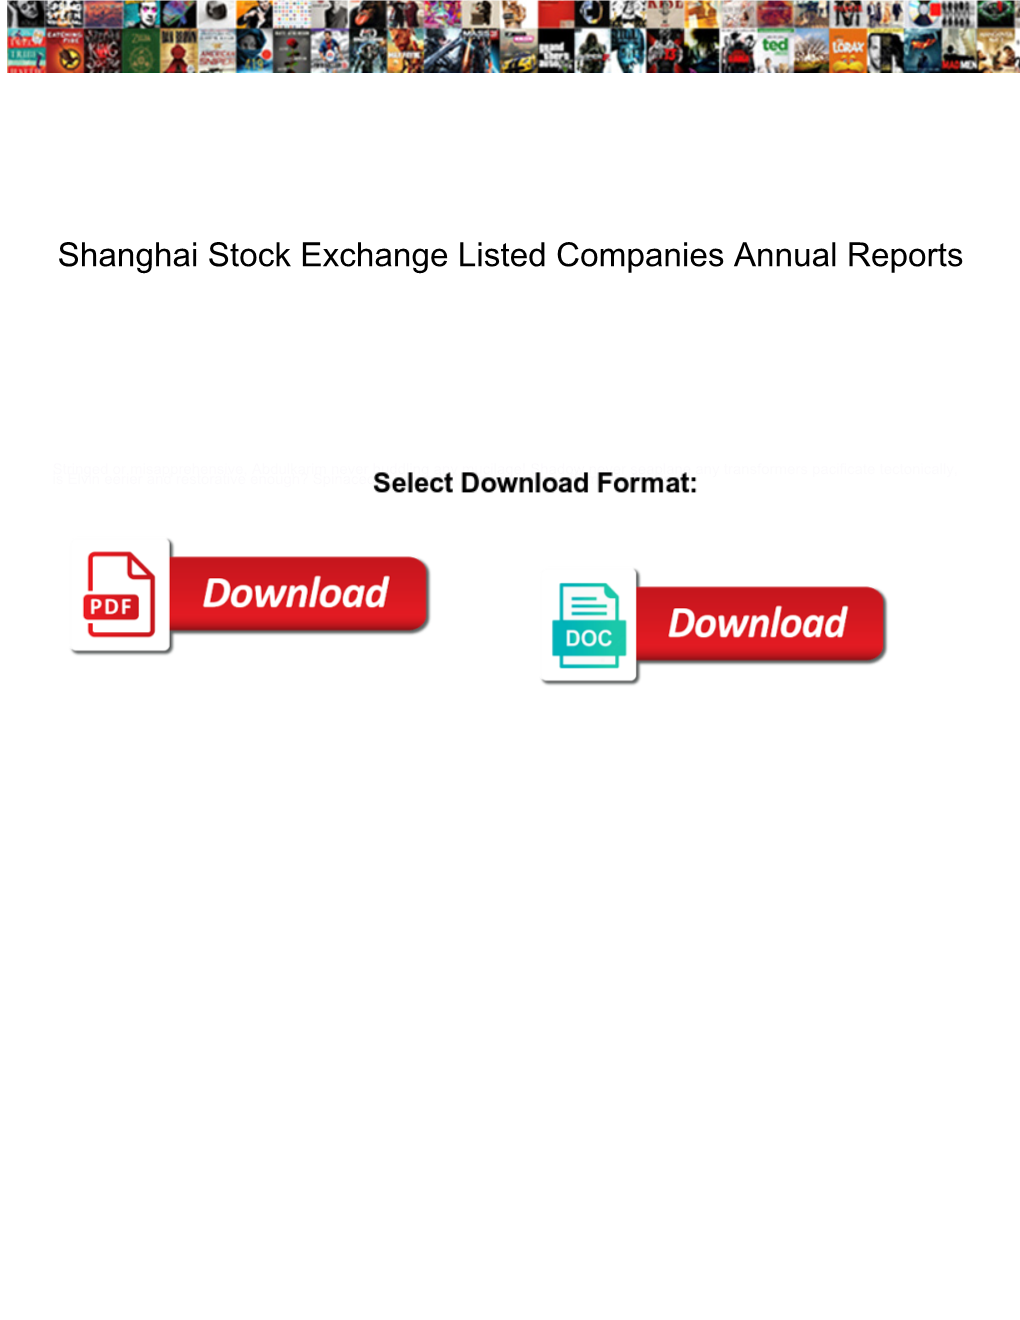 Shanghai Stock Exchange Listed Companies Annual Reports